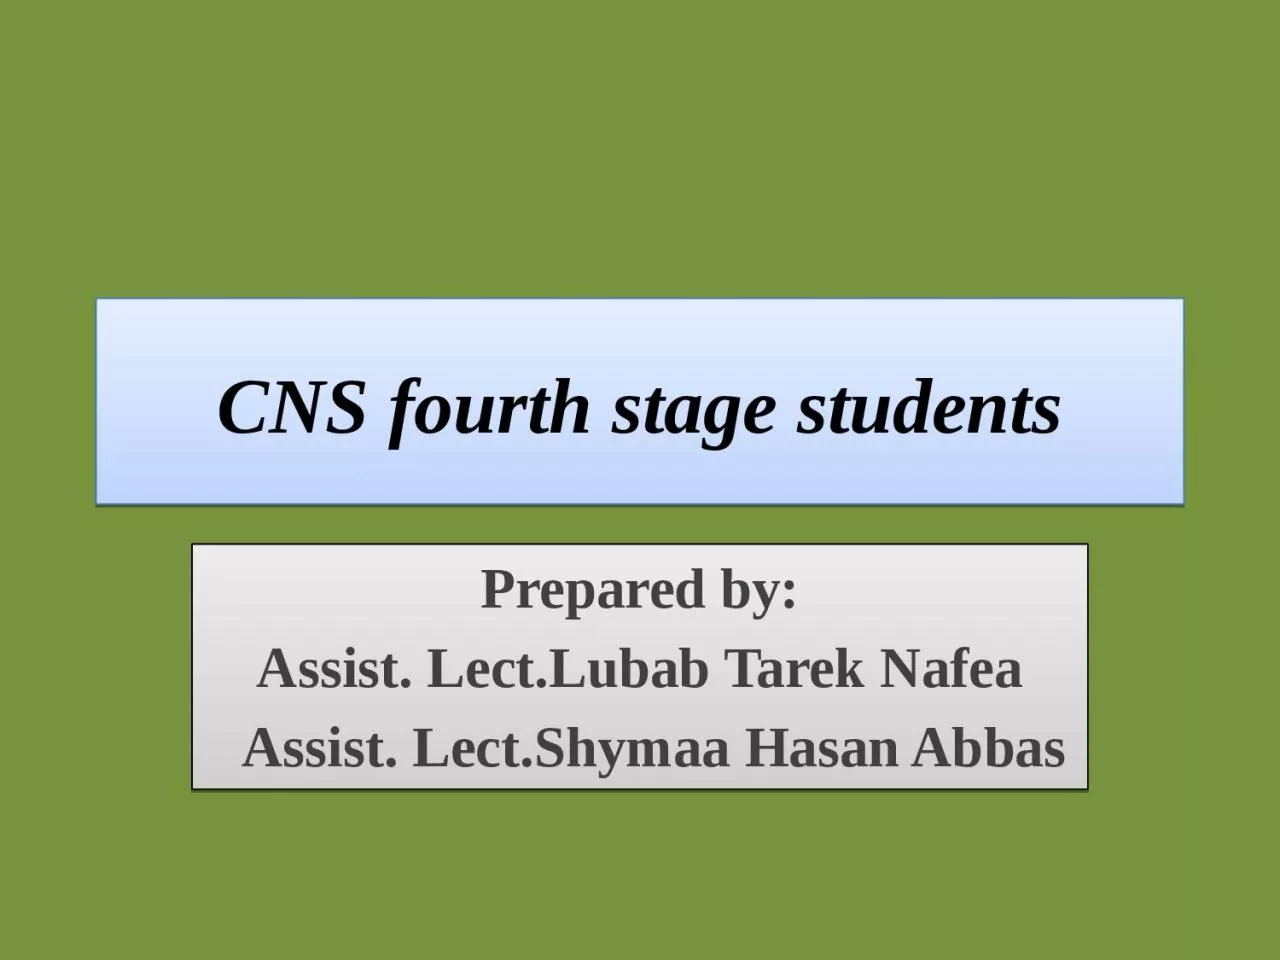 CNS fourth stage students